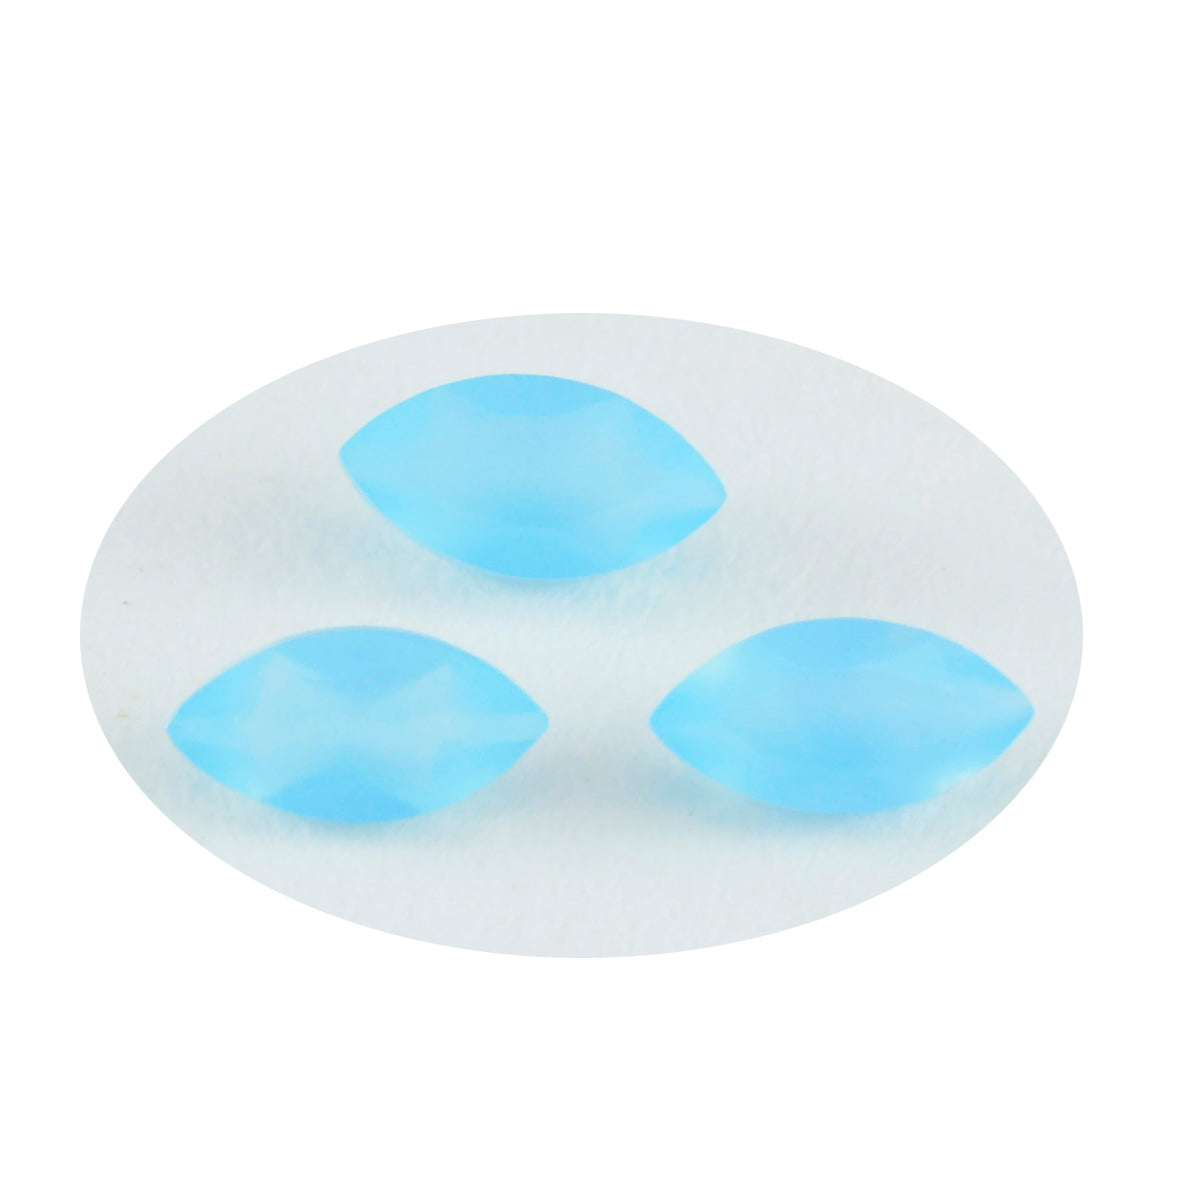 Riyogems 1PC Natural Blue Chalcedony Faceted 7x14 mm Marquise Shape A+1 Quality Loose Gemstone